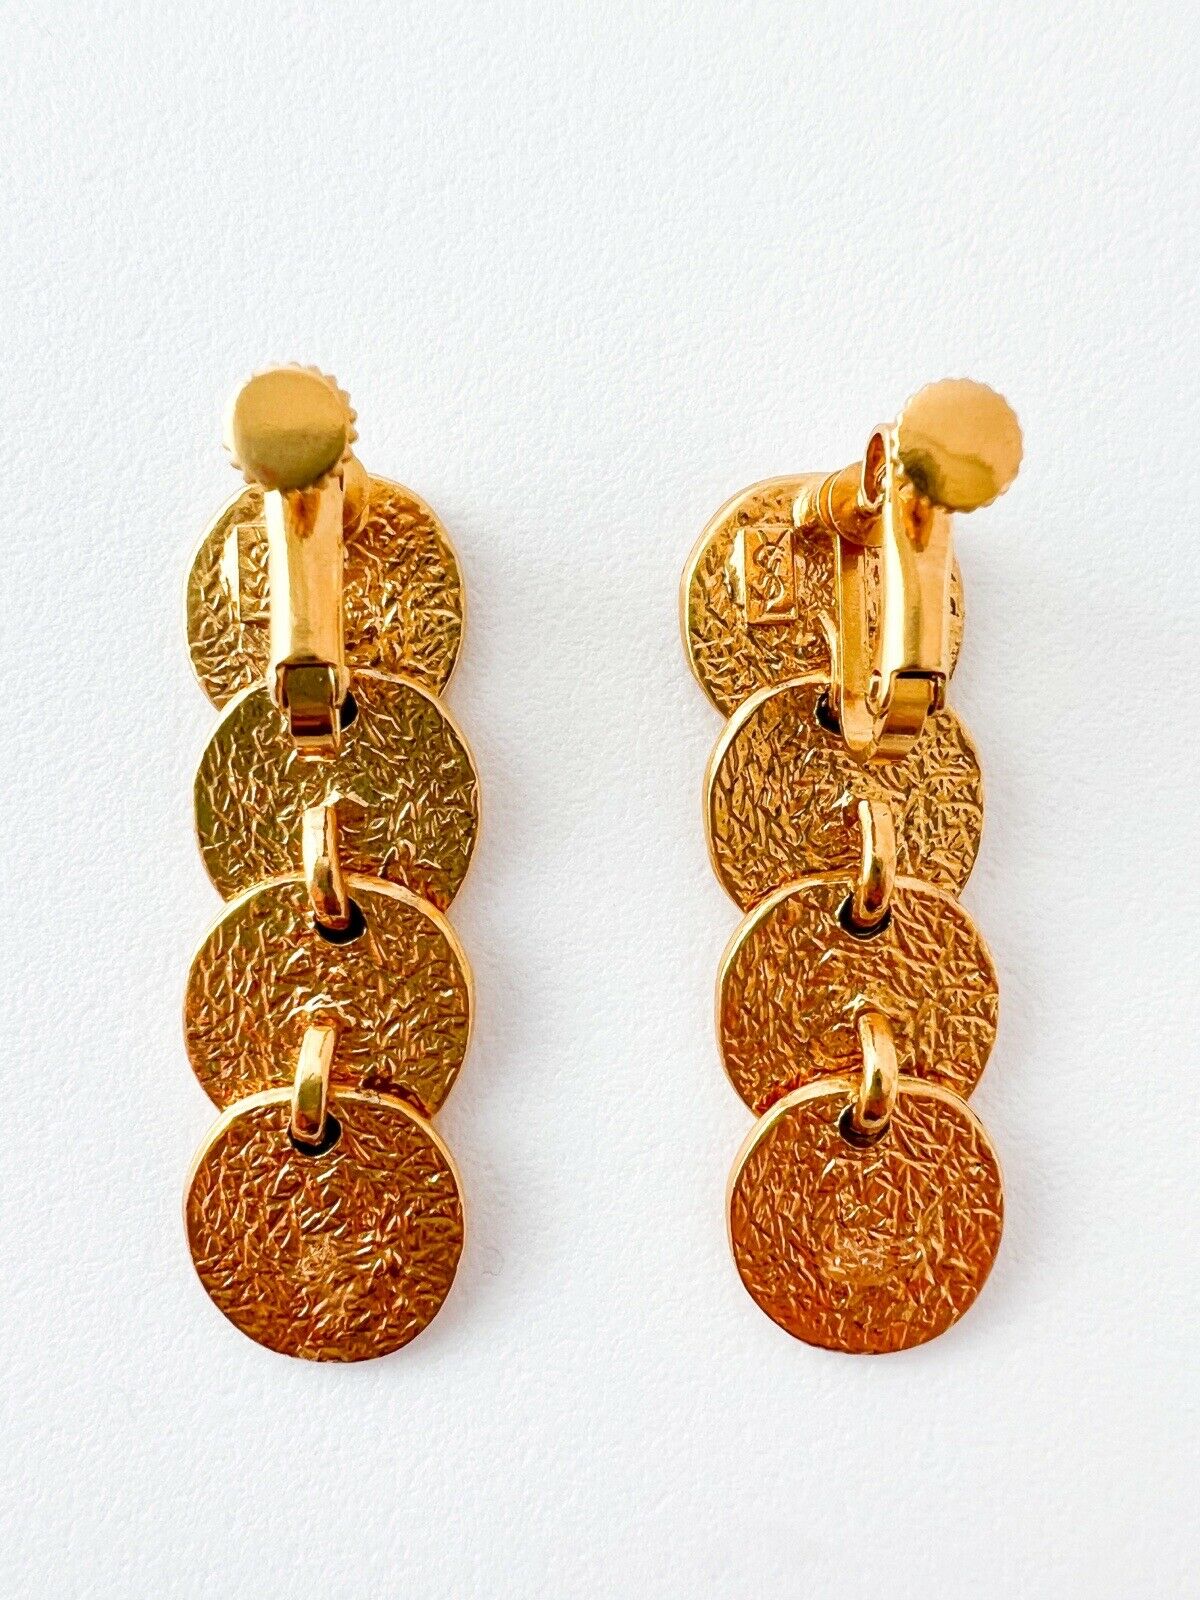 【SOLD OUT】YSL Yves Saint Laurent Vintage Earrings Dangle Drop Stylish Gold Tone